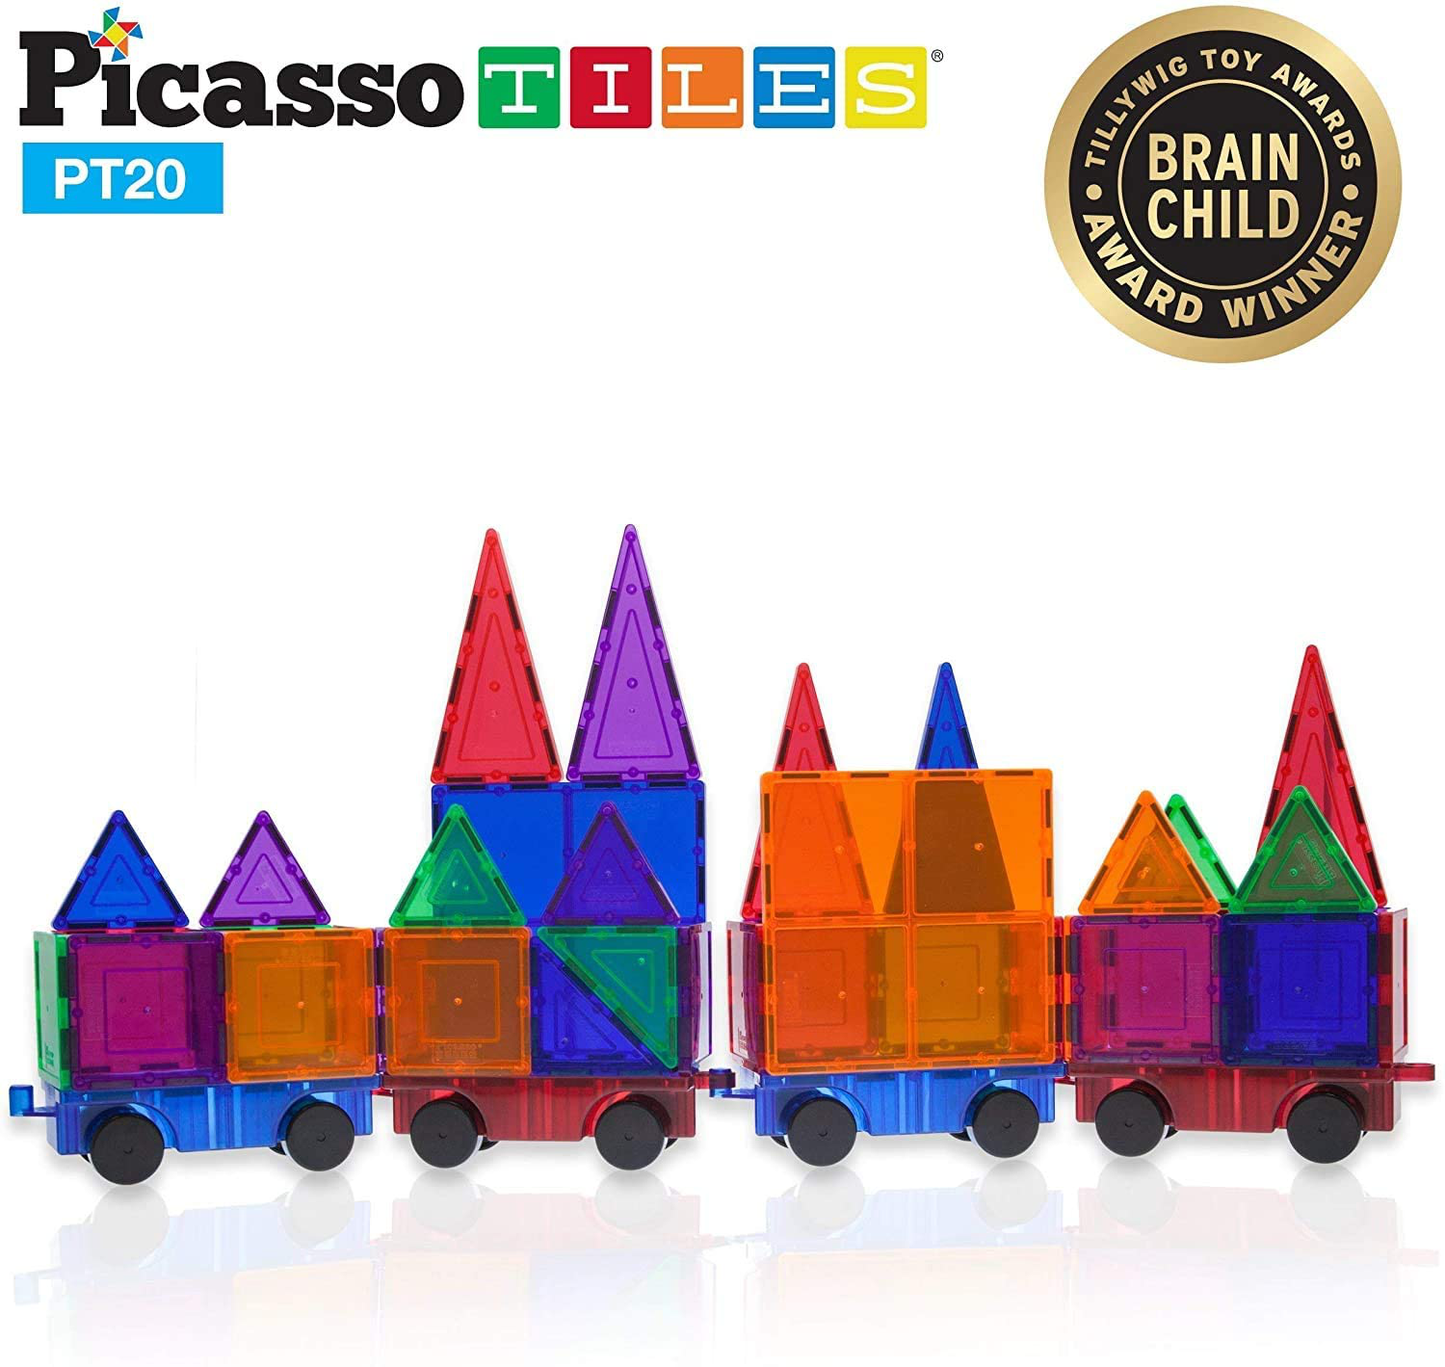 PicassoTiles 2 Piece Car Truck Construction Kit Toy Set Vehicle Educational Magnet Building Tile Magnetic Blocks Puzzle Magnets Toys with Re-Enforced Hitch and Long Bed for Girls Boys Toddler Ages 3+